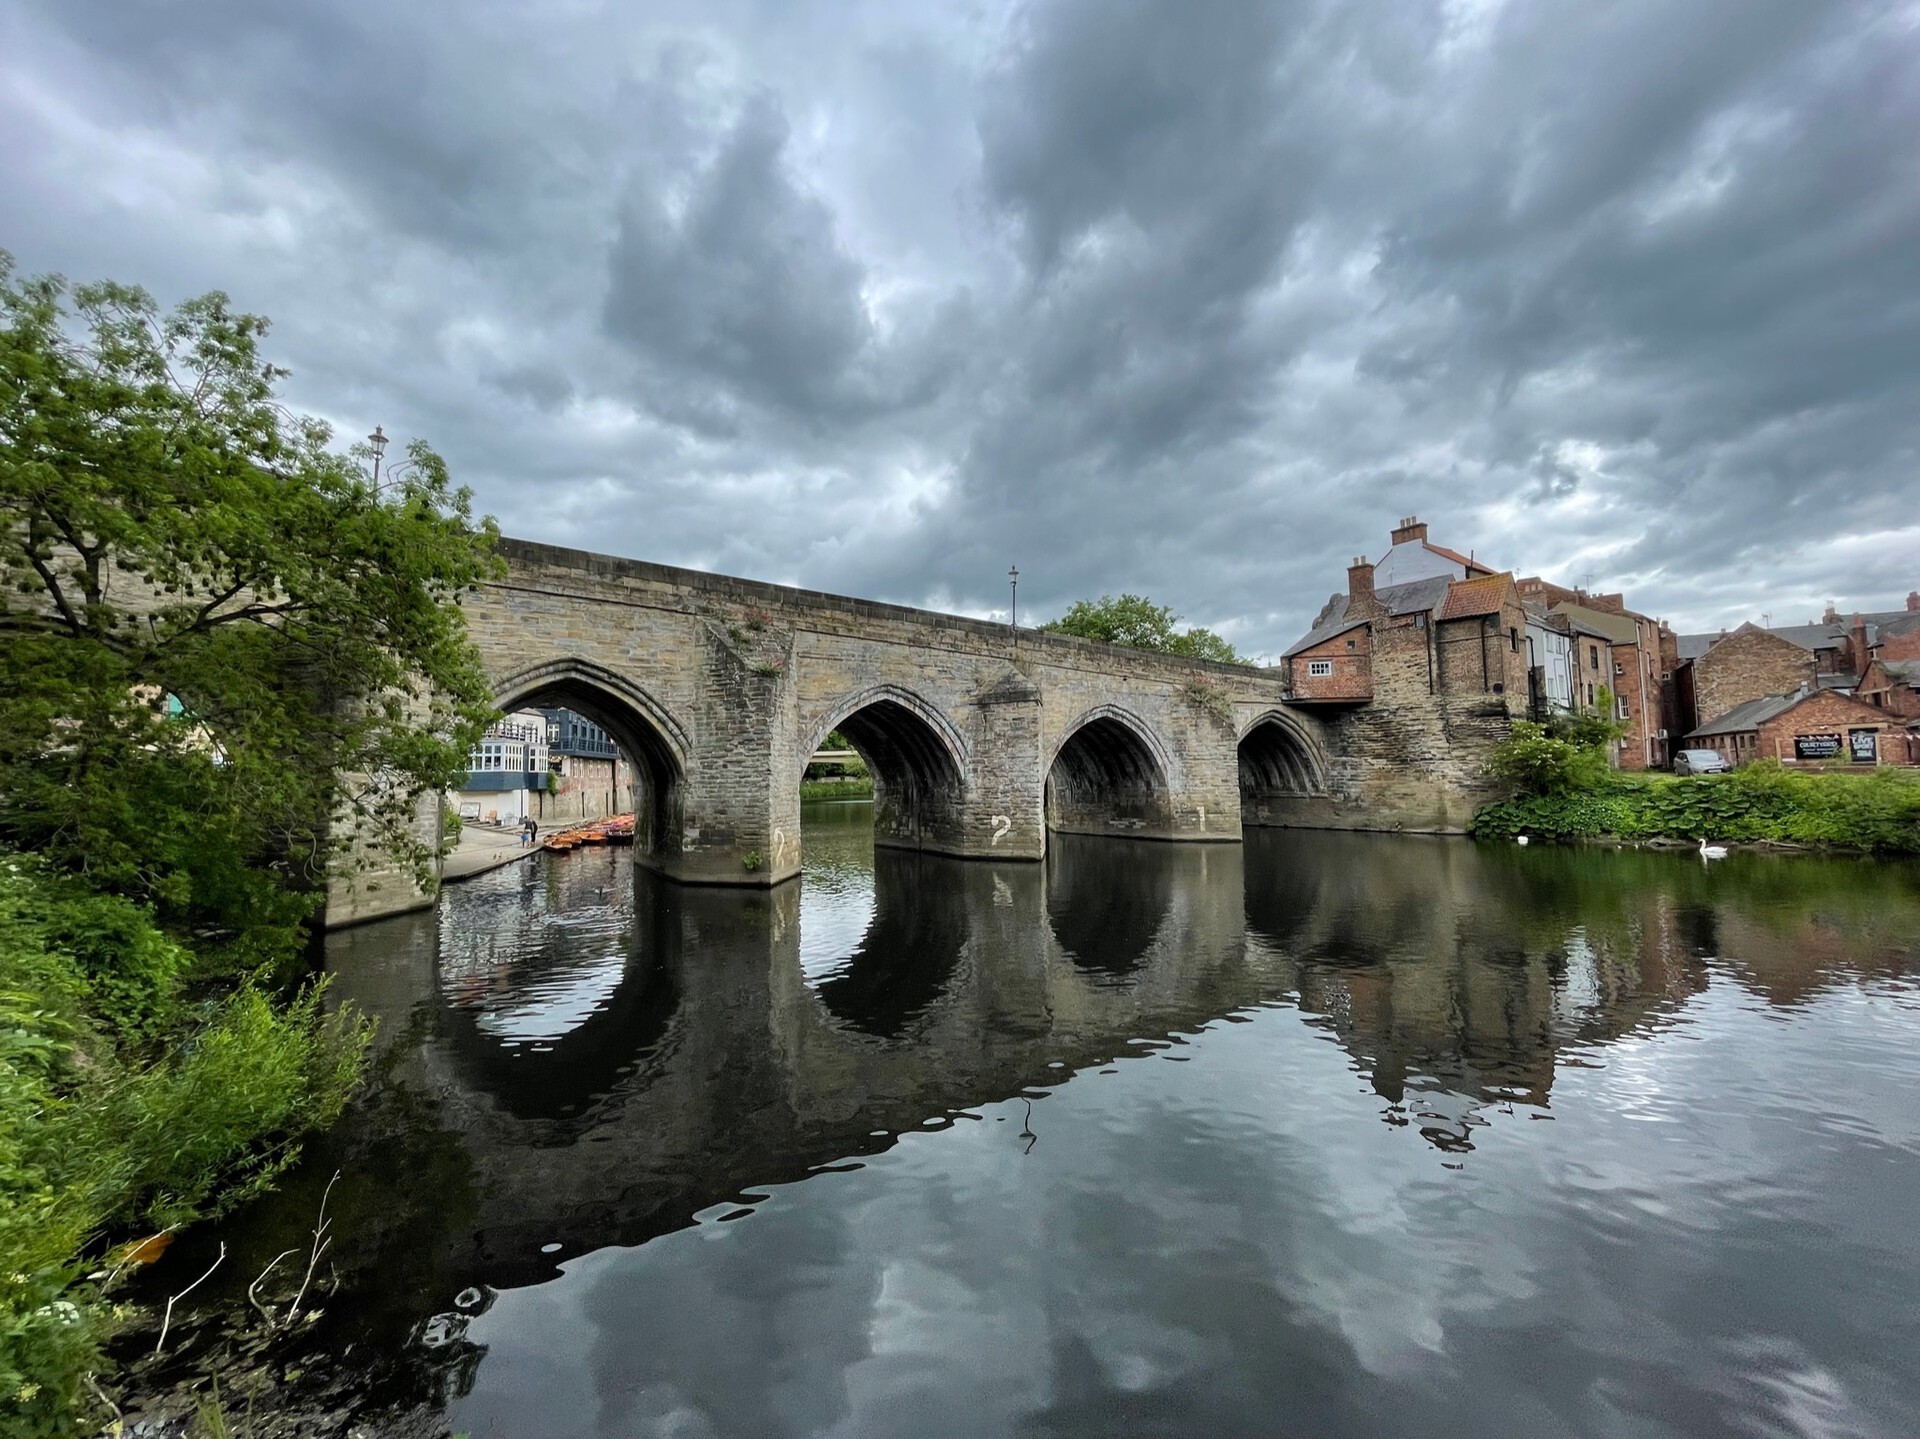 The Old Elvet Bridge, which reportedly extends for another 3 arches underground on either side.